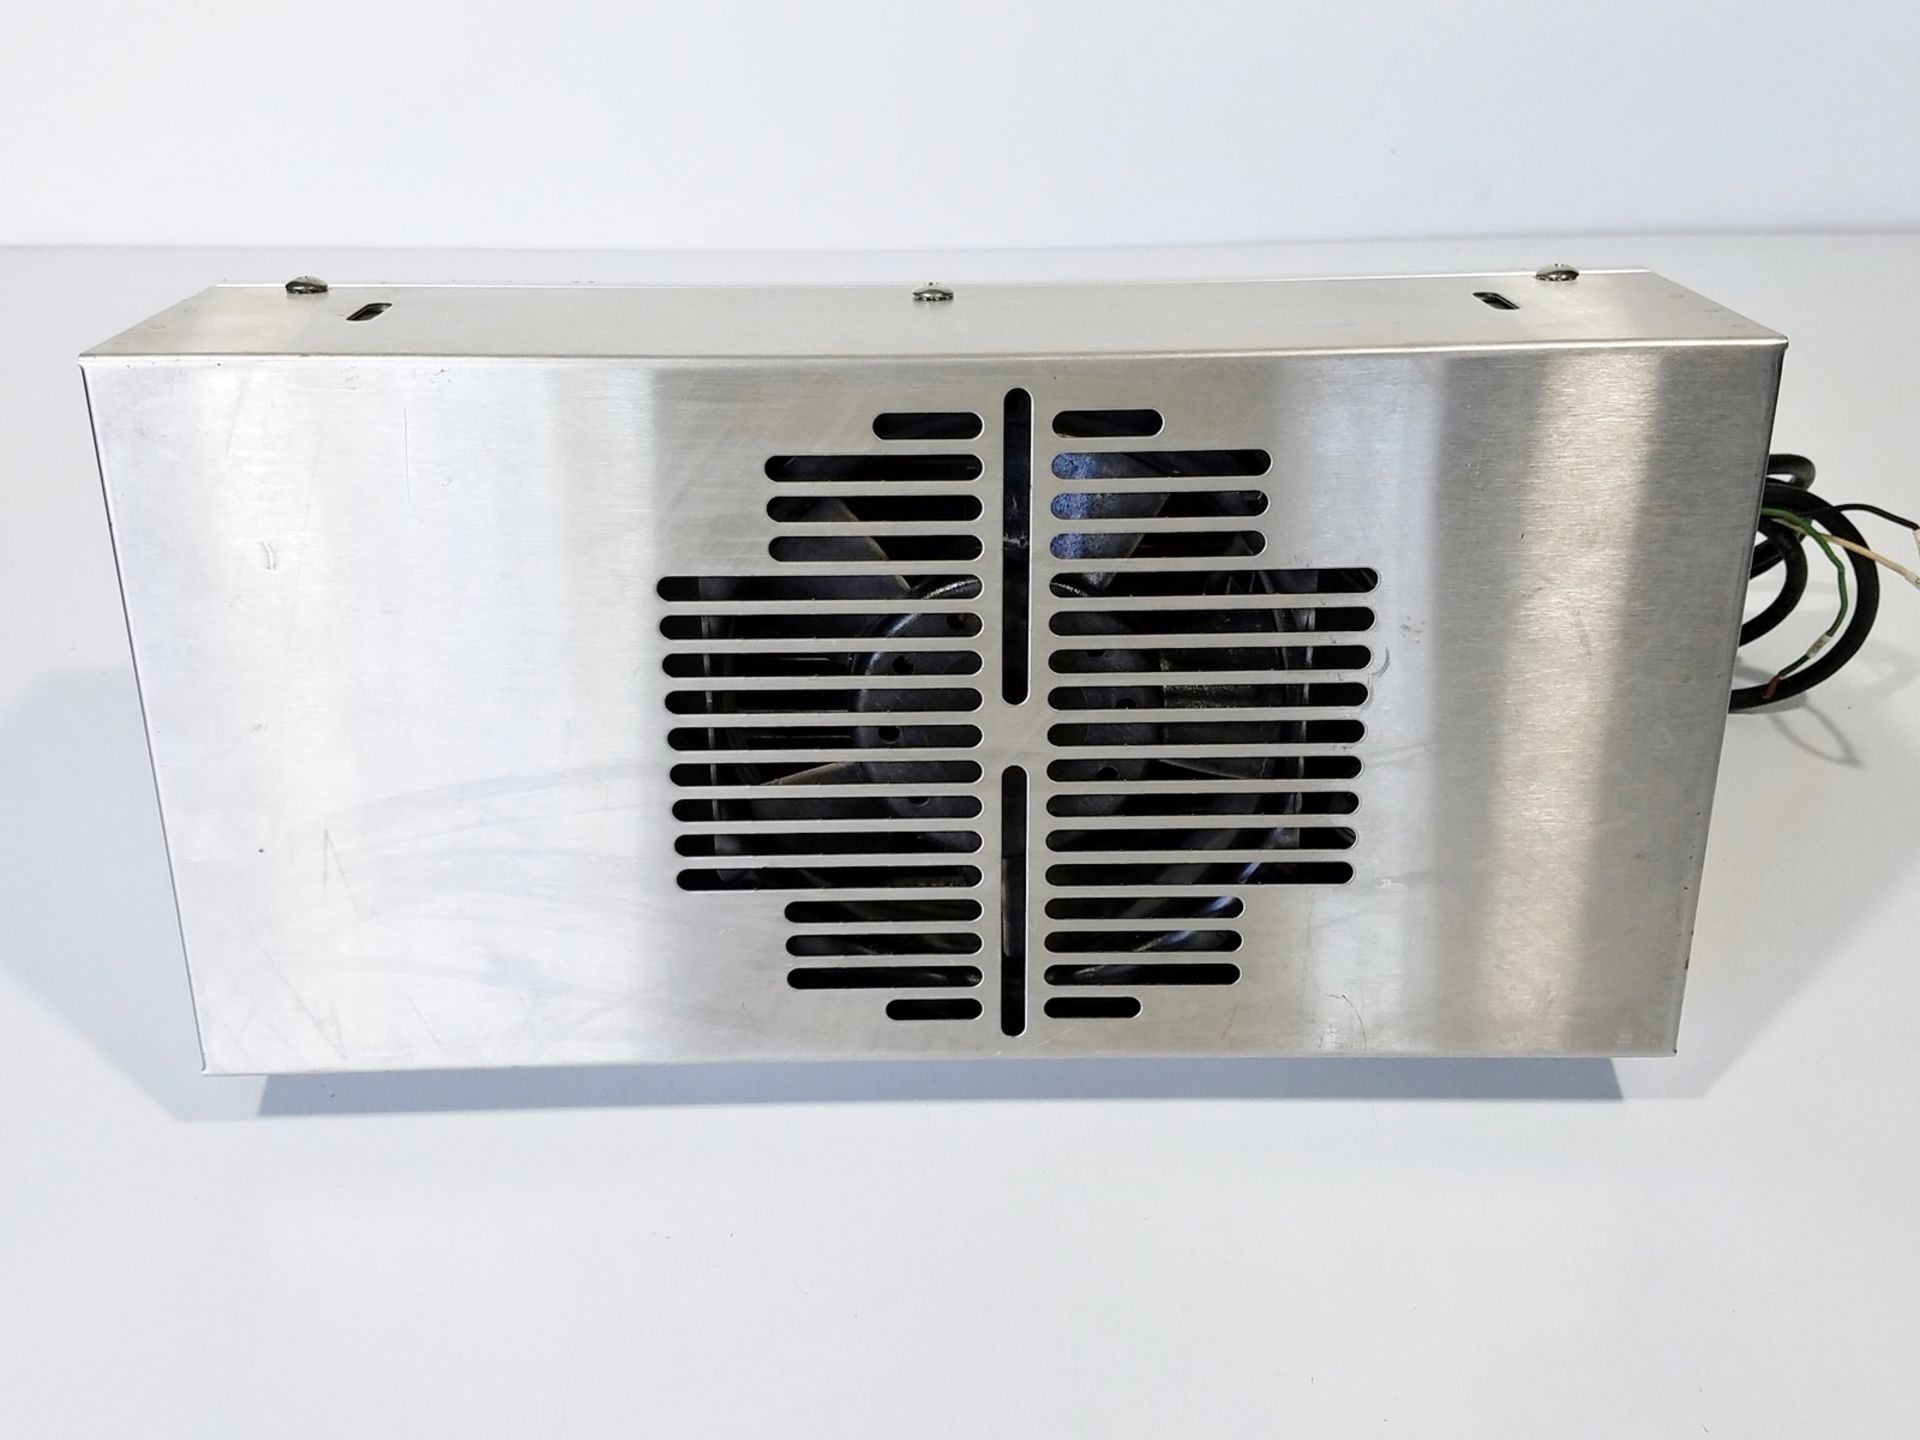 TECA SOLID STATE A/C UNIT - Image 4 of 6